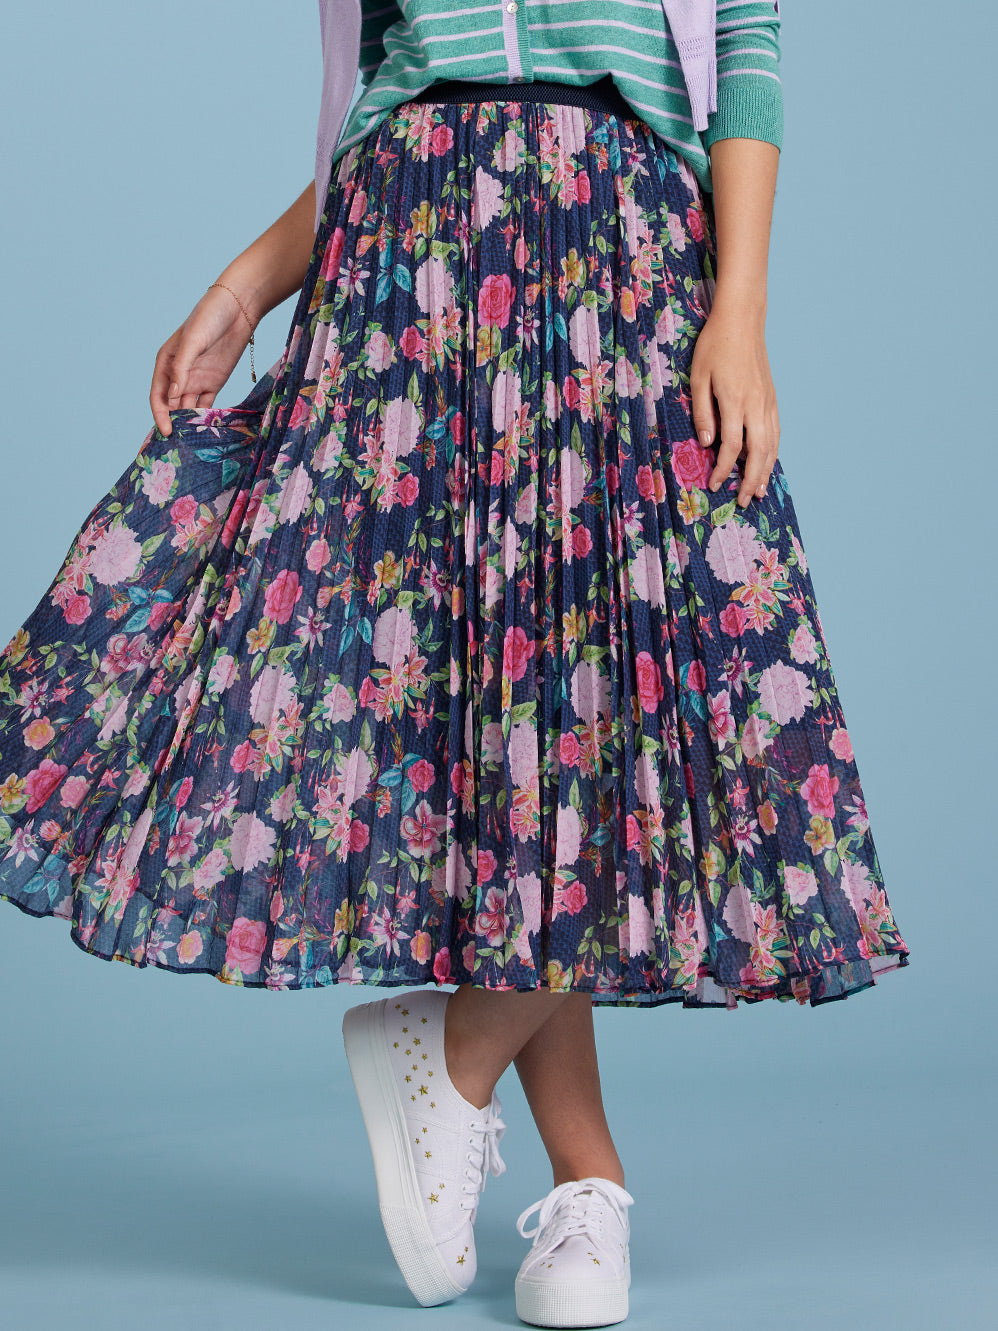 MADLY SWEETLY FUCHSIARISTIC PLEAT SKIRT